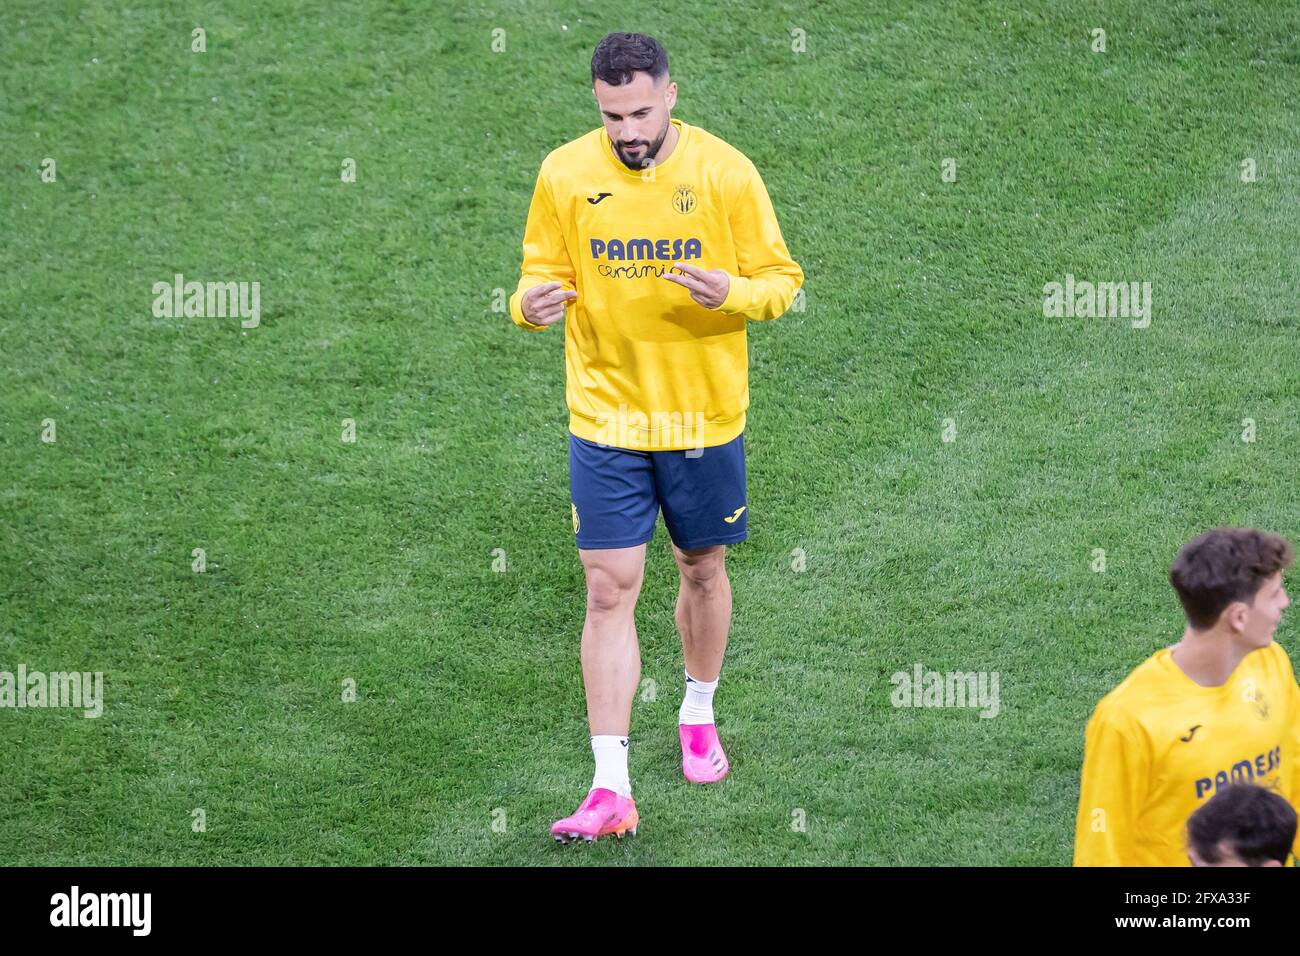 Gdansk, Poland. 25th May, 2021. Mario Gaspar of Villarreal CF in action  during the official training session one day before the UEFA Europa League  Final 2021 match between Villarreal CF and Manchester